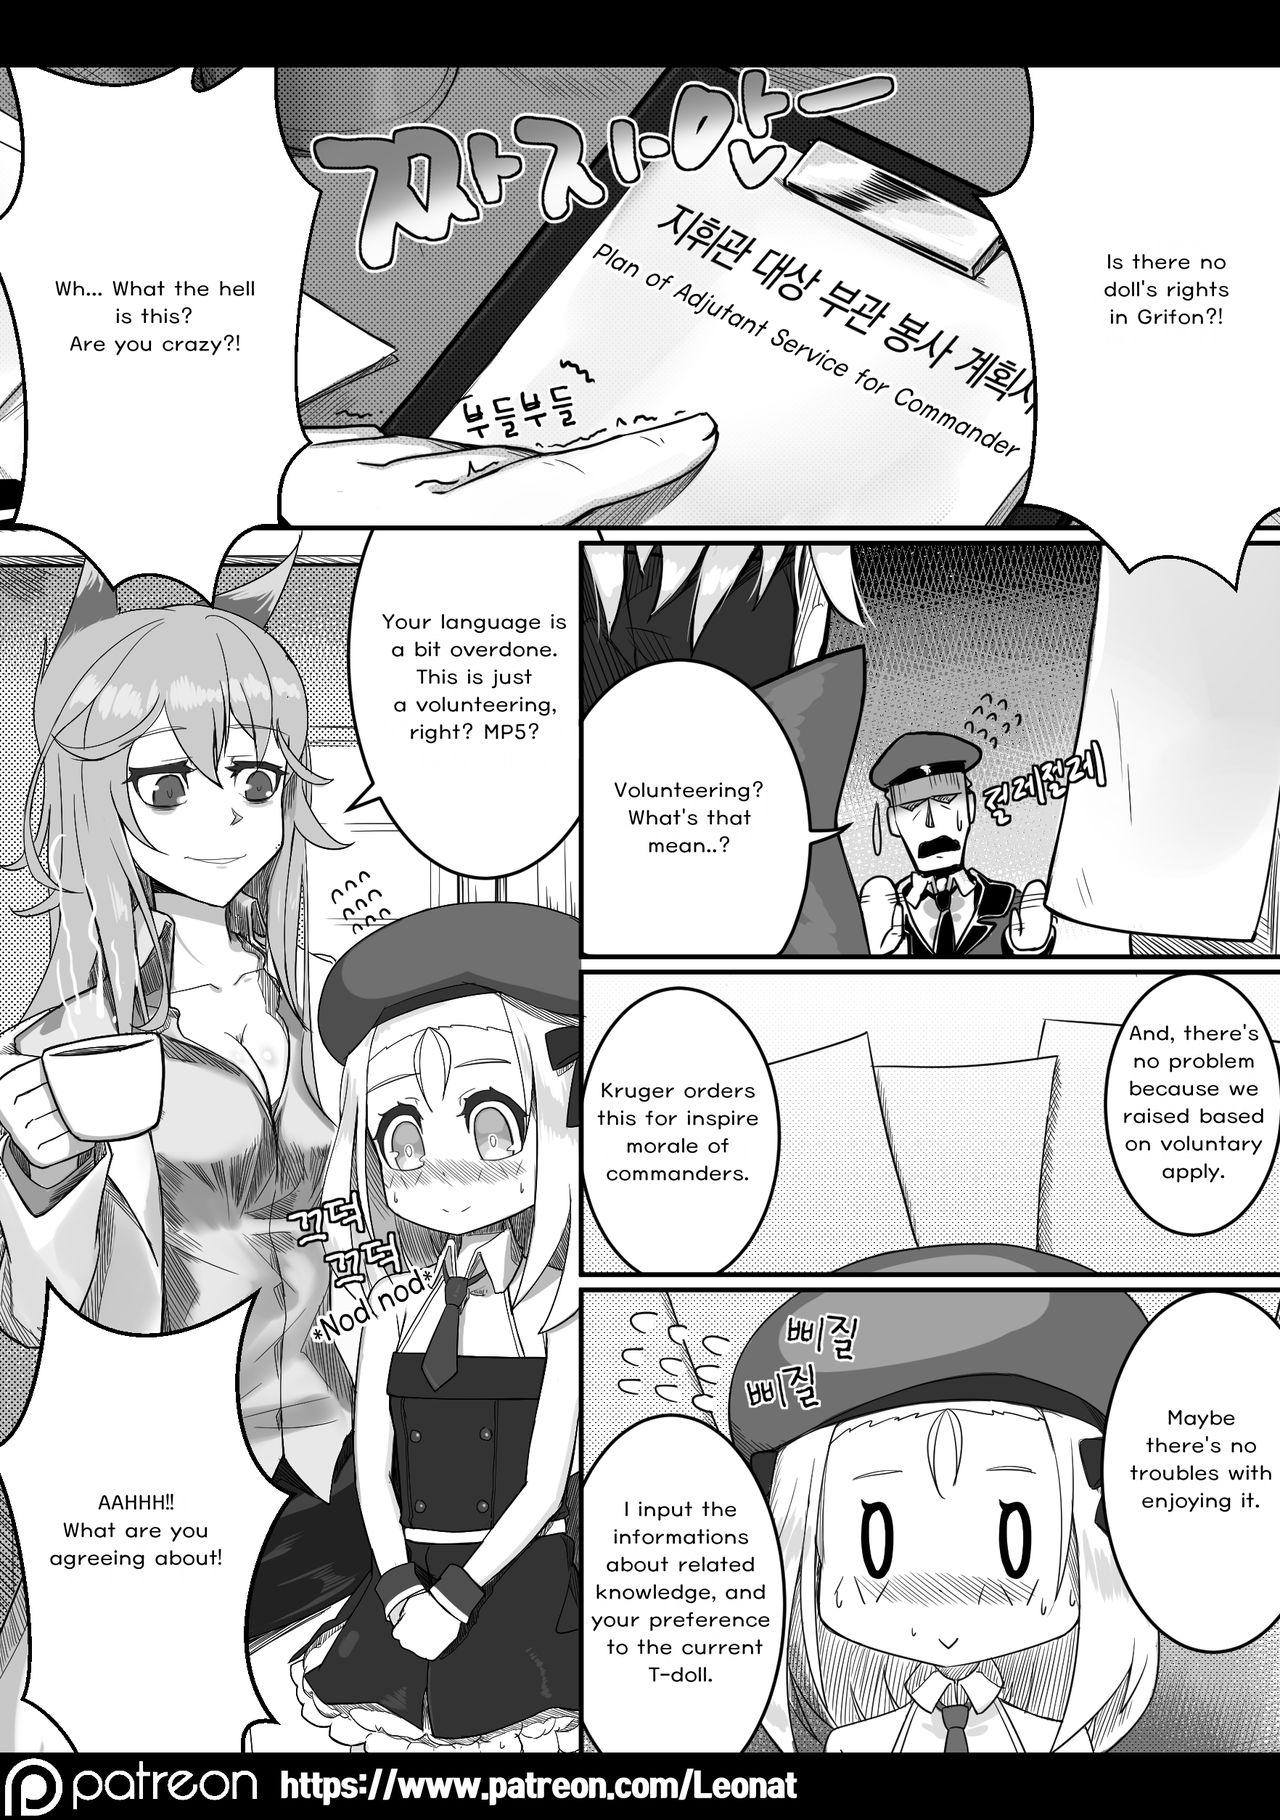 Best Blowjobs Lounge of HQ vol.2 - Girls frontline Femdom - Page 6